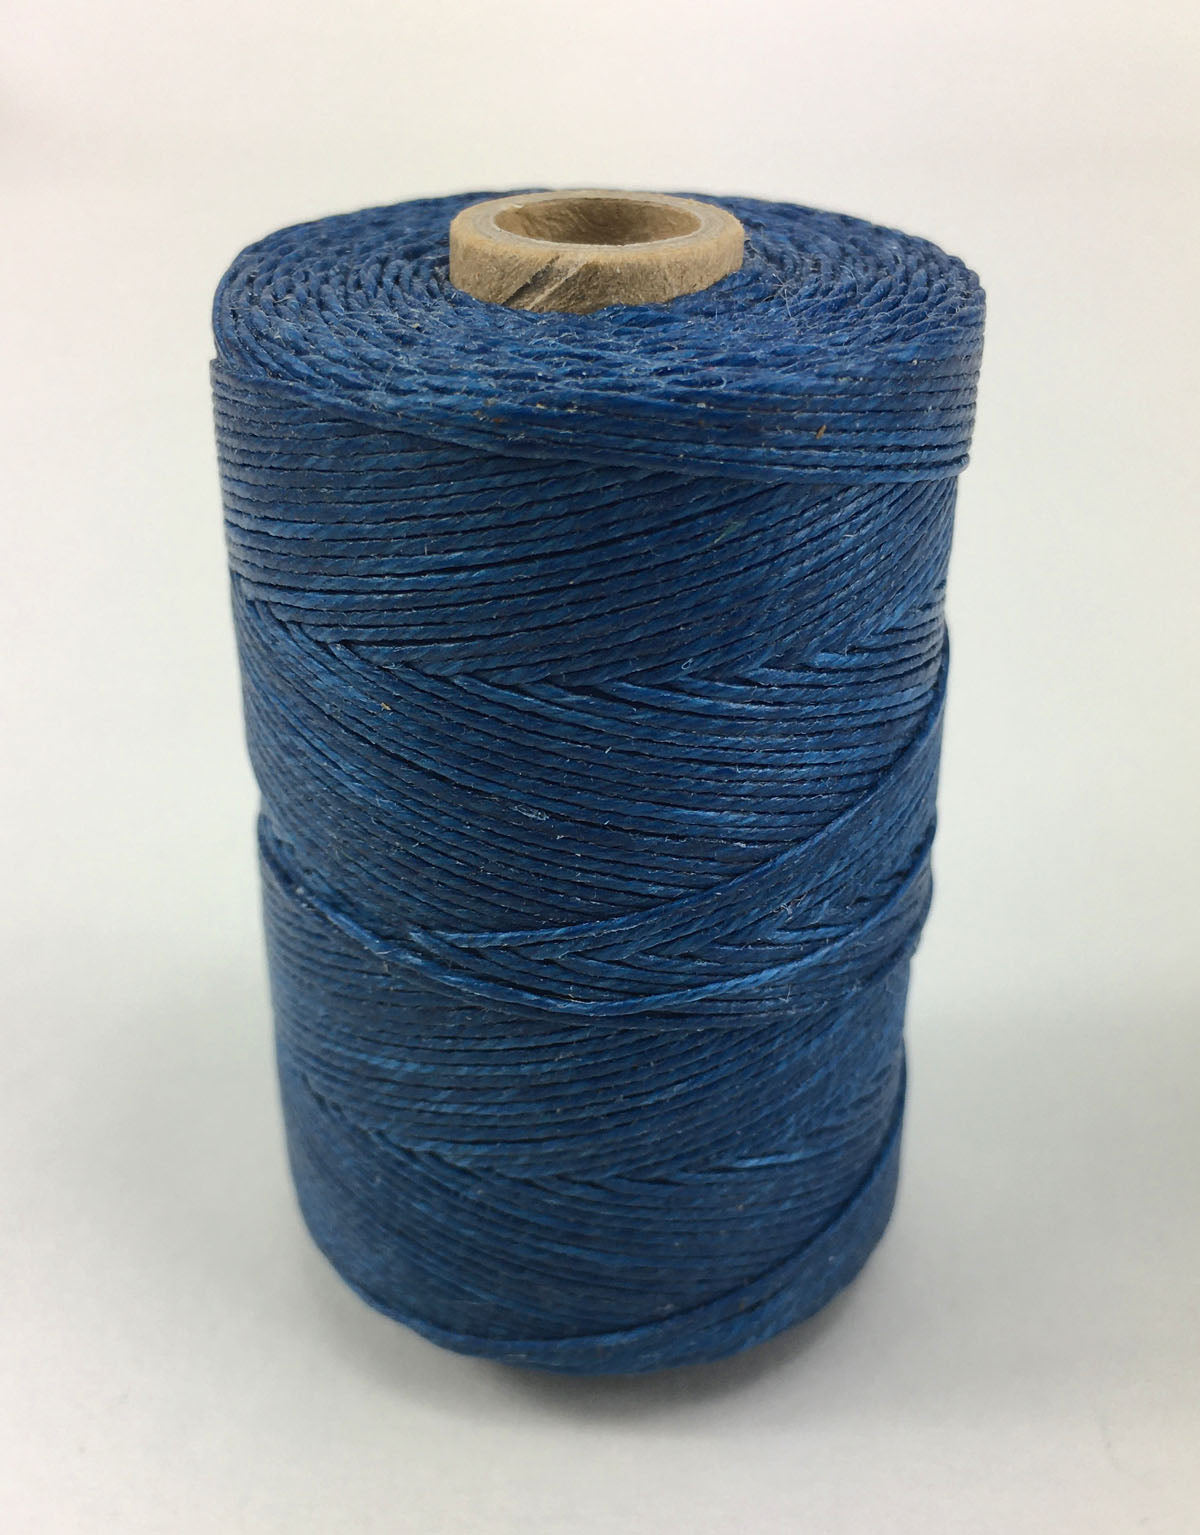 Royal Blue- Per spool 50g- 100% Pure Linen Thread- Waxed- 18/3 No.18 Cord 3- Approx 0.55mm thick